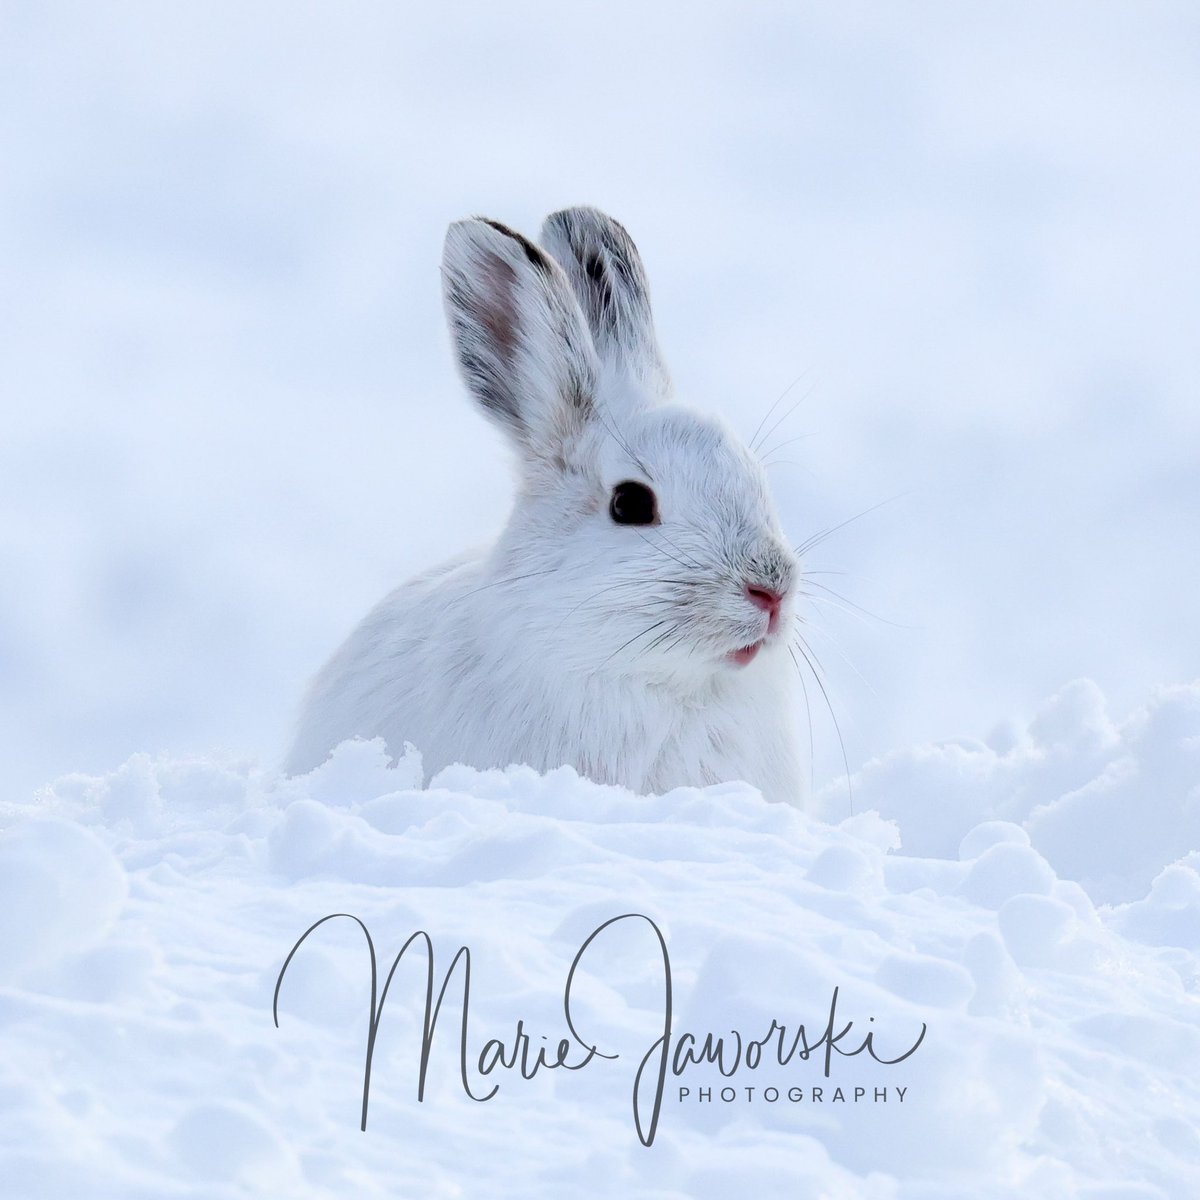 Happy Easter 🐣 #SnowShoeHare #HappyEaster #EasterBunny #Hare